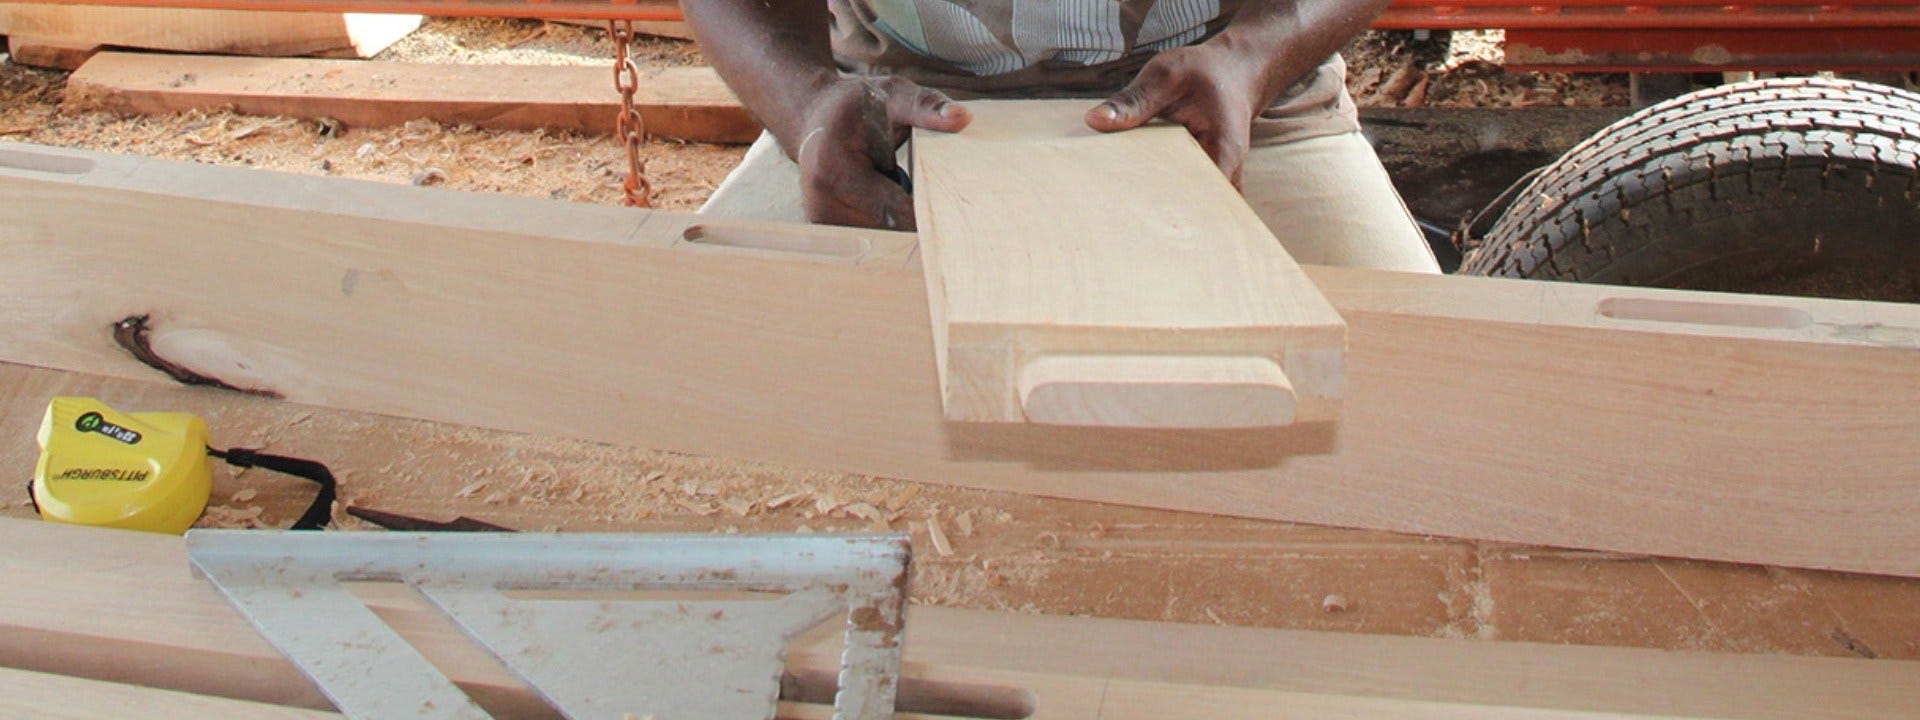 Caribbean Family Grows Woodworking Business with Portable Sawmill